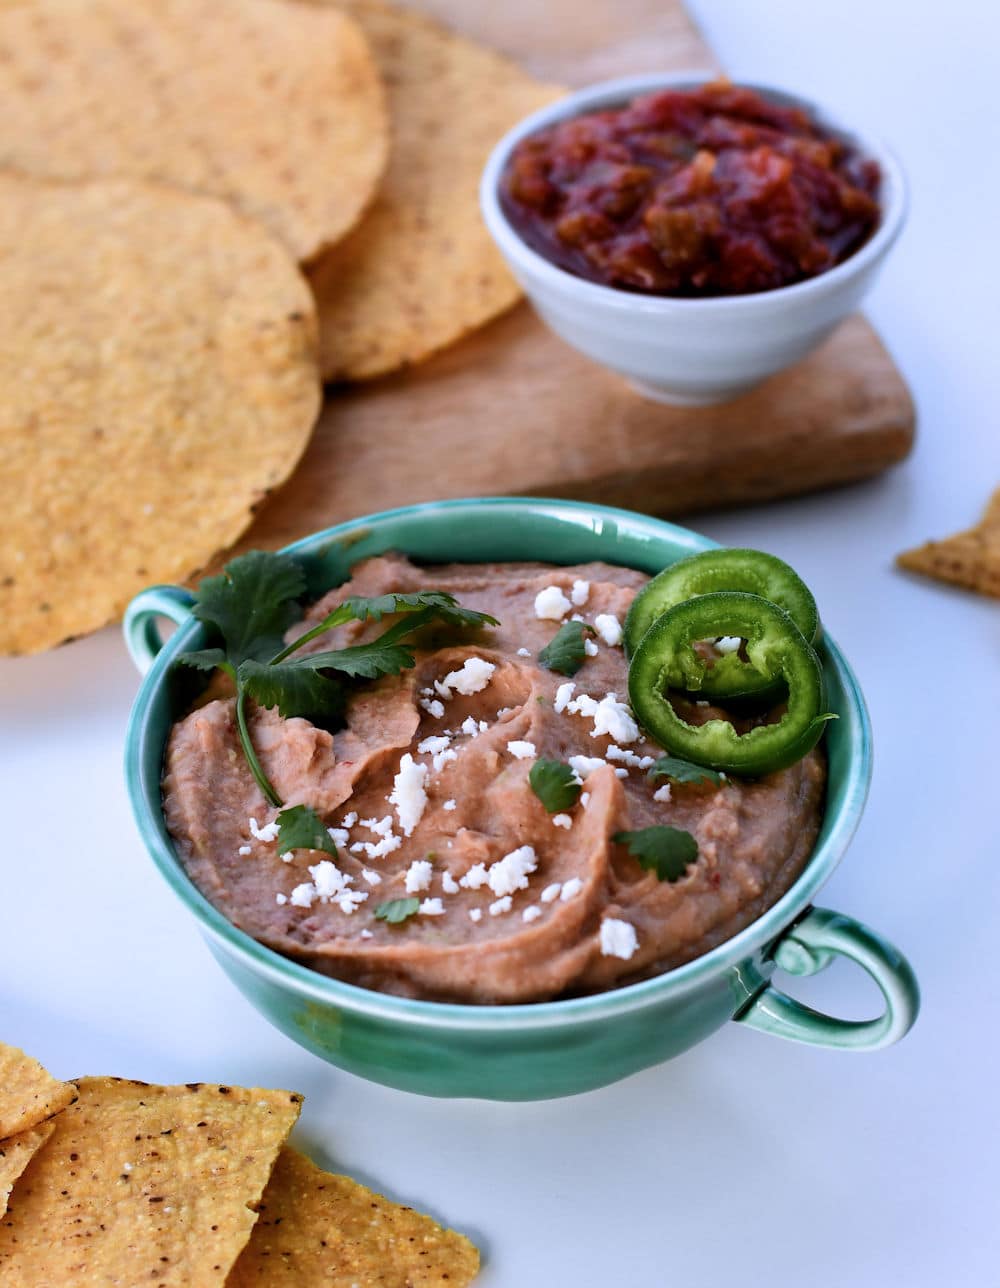 24Bite: Small two-handled bowl with instant pot vegan bean dip shown with tostadas and salsa